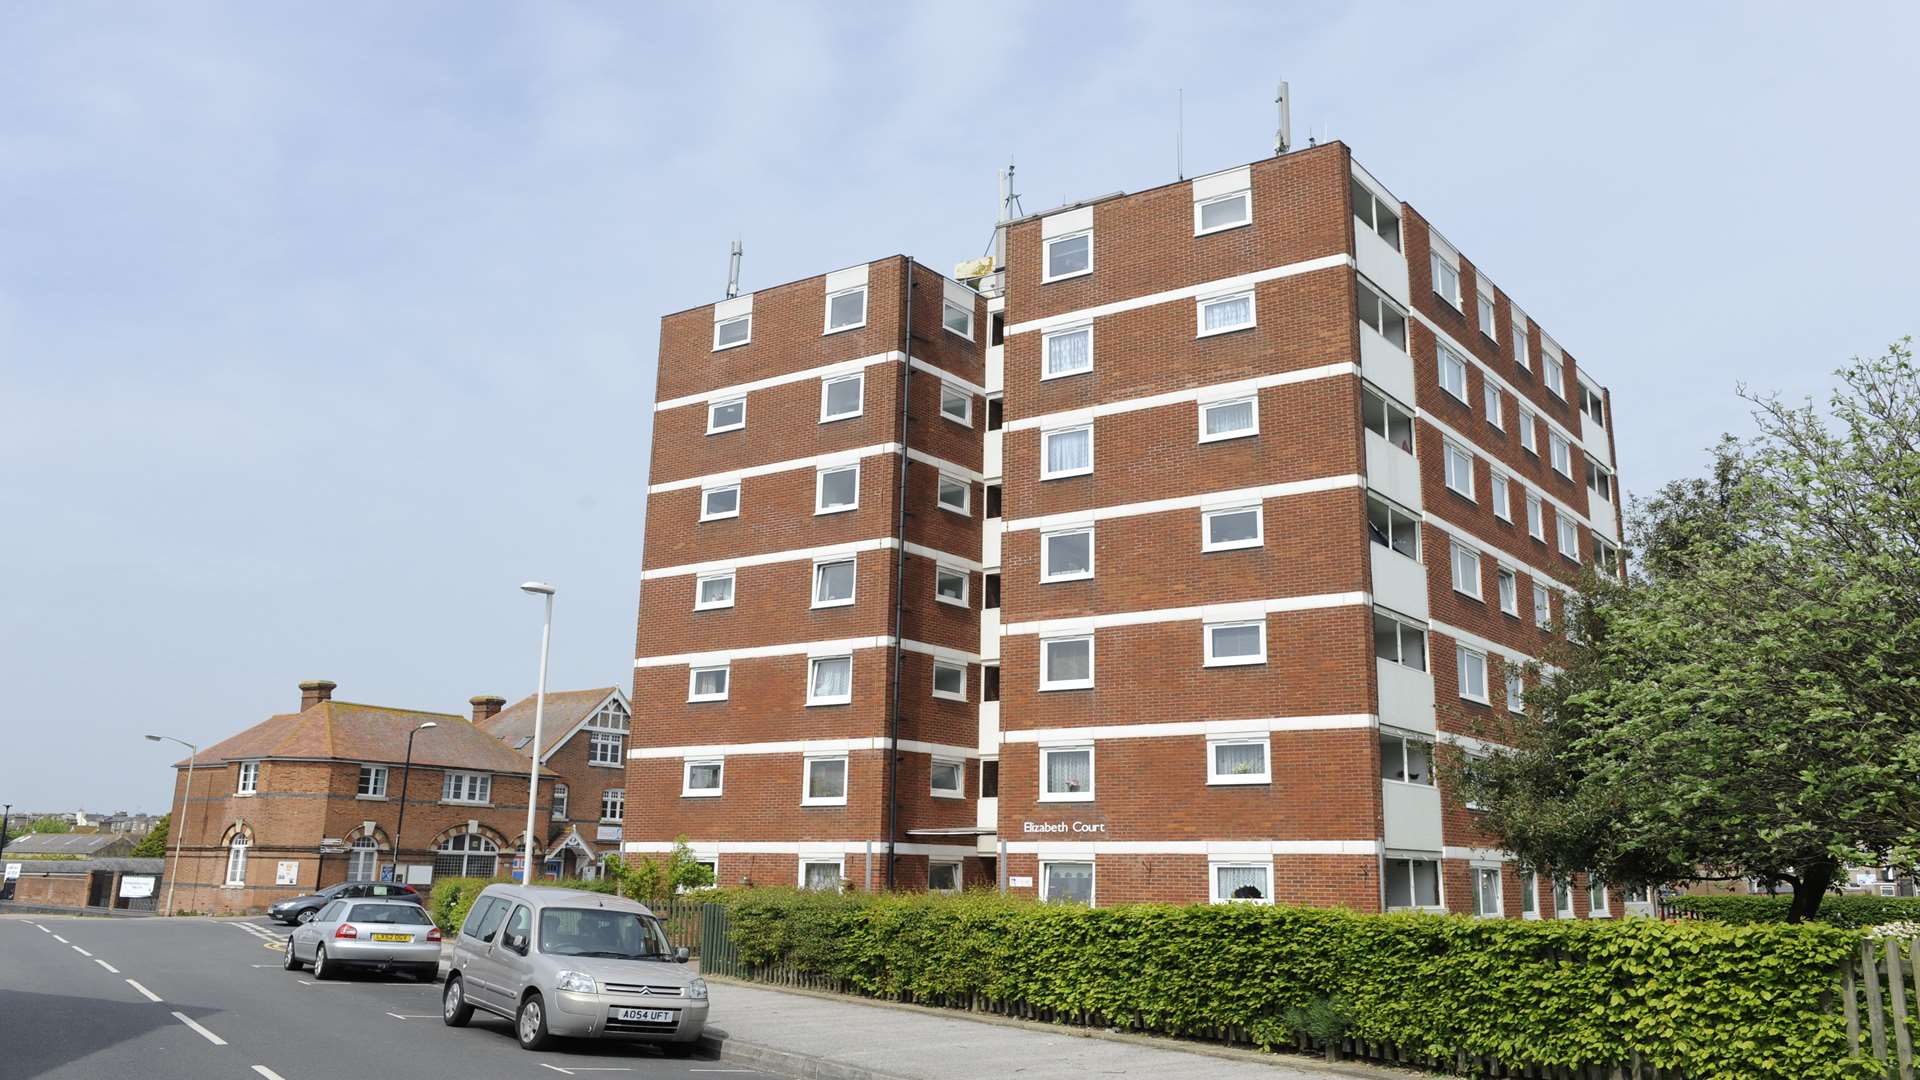 Elizabeth Court is one tower block managed by East Kent Housing